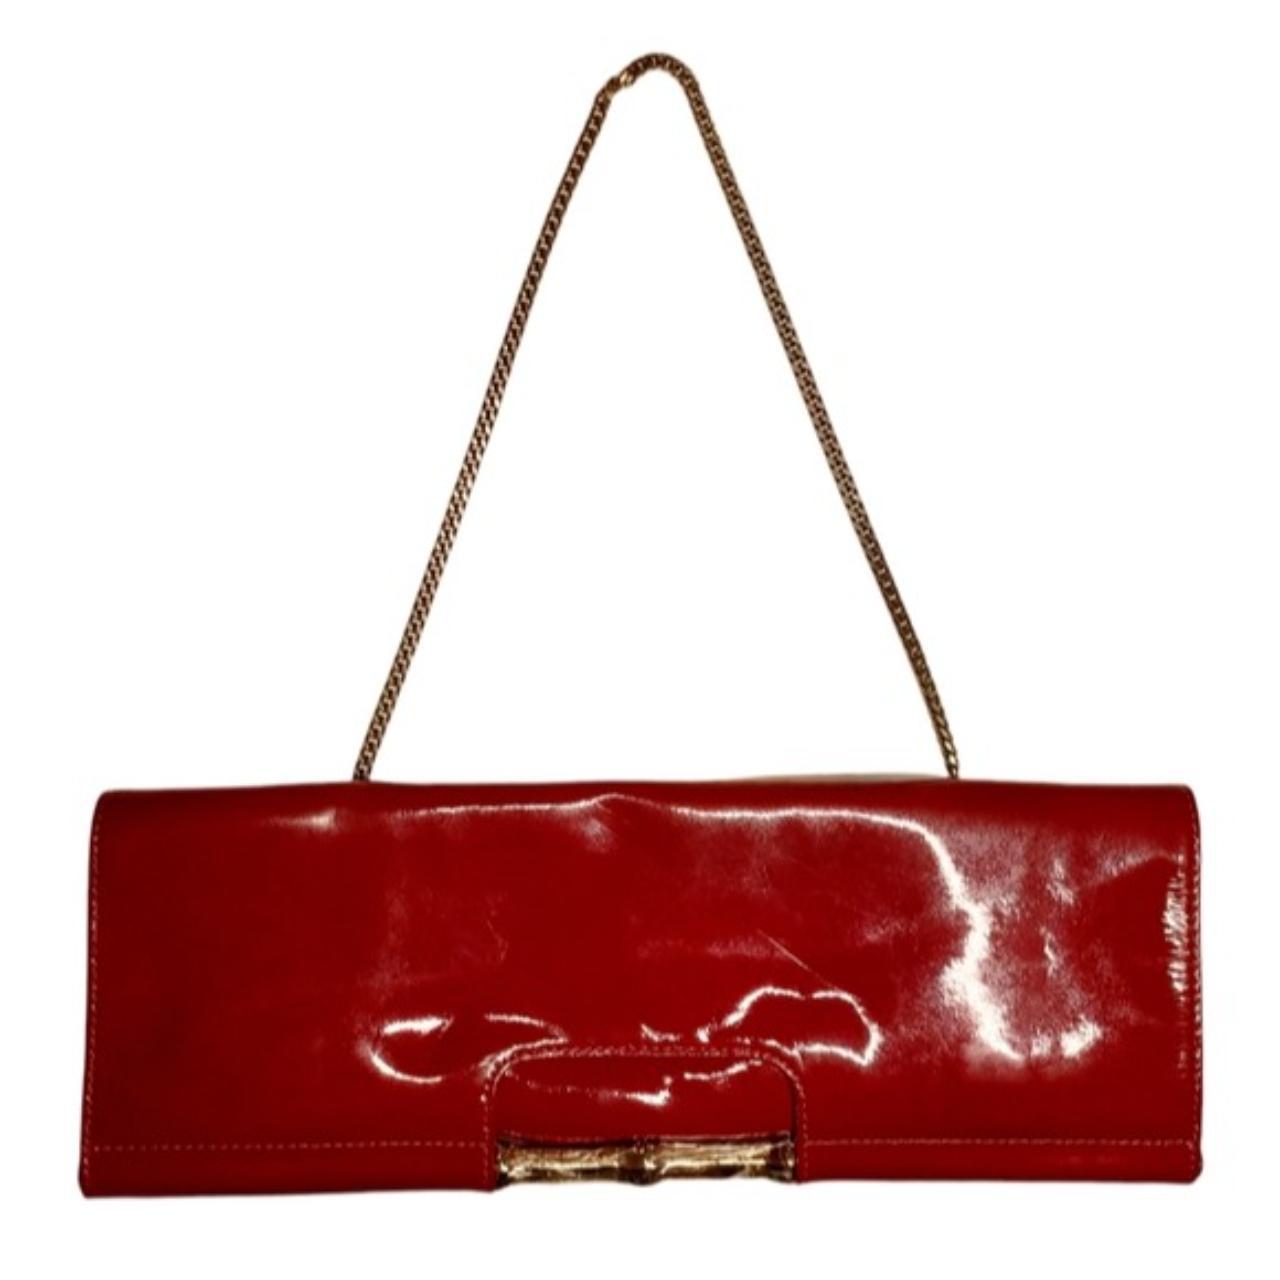 Guess Leather Handbag in Red